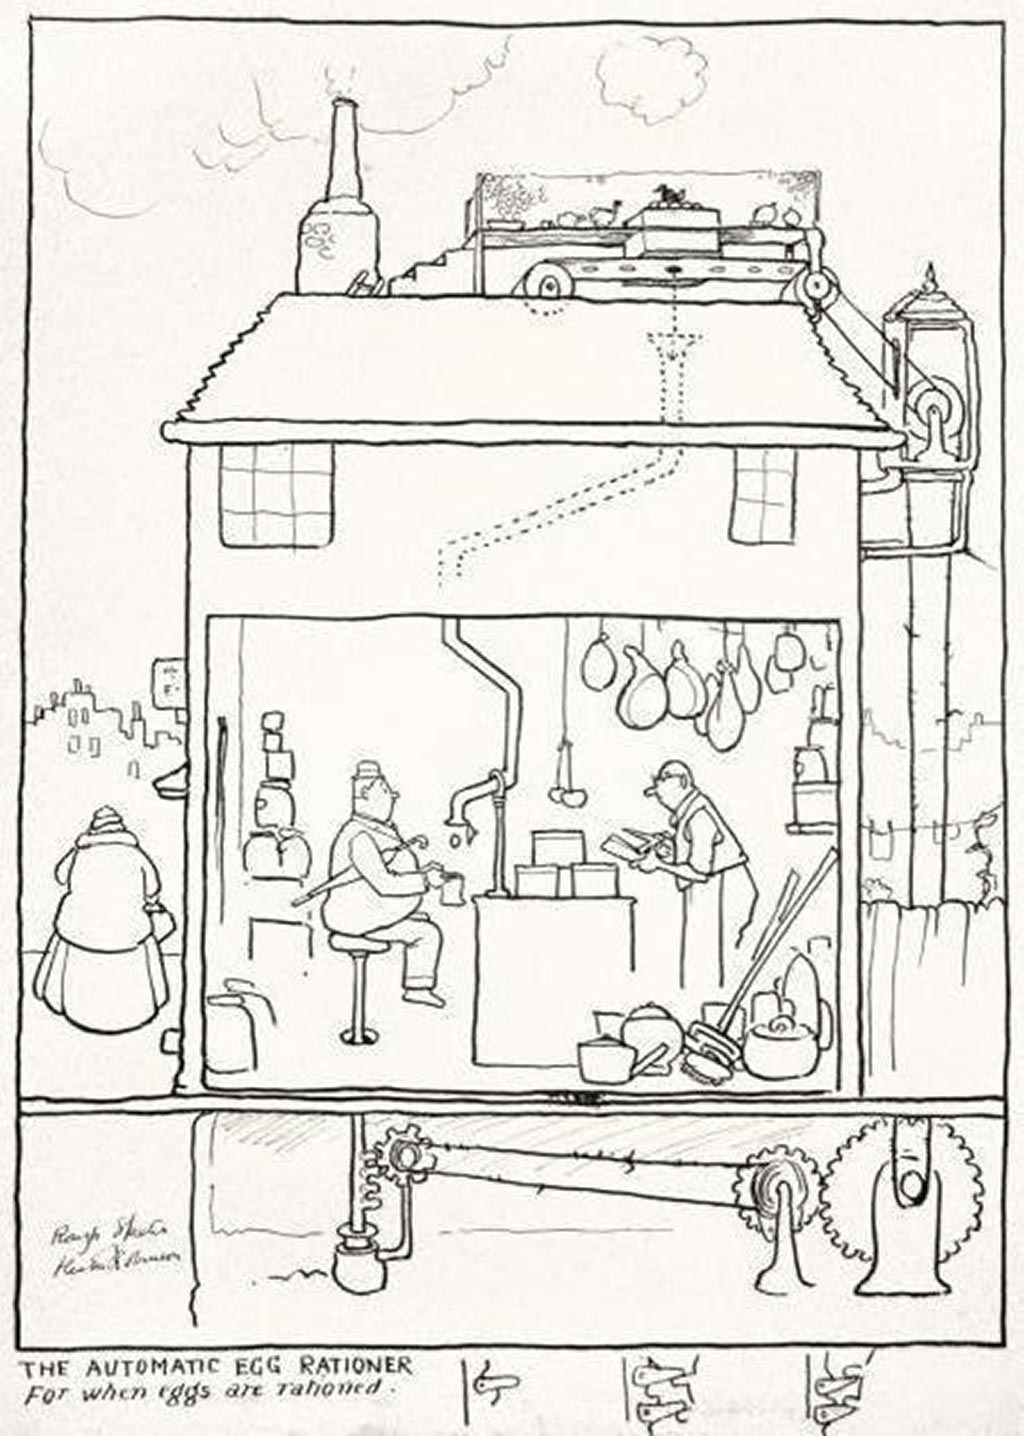 william_heath_robinson_inventions_the_automatic_egg_rationer_1940